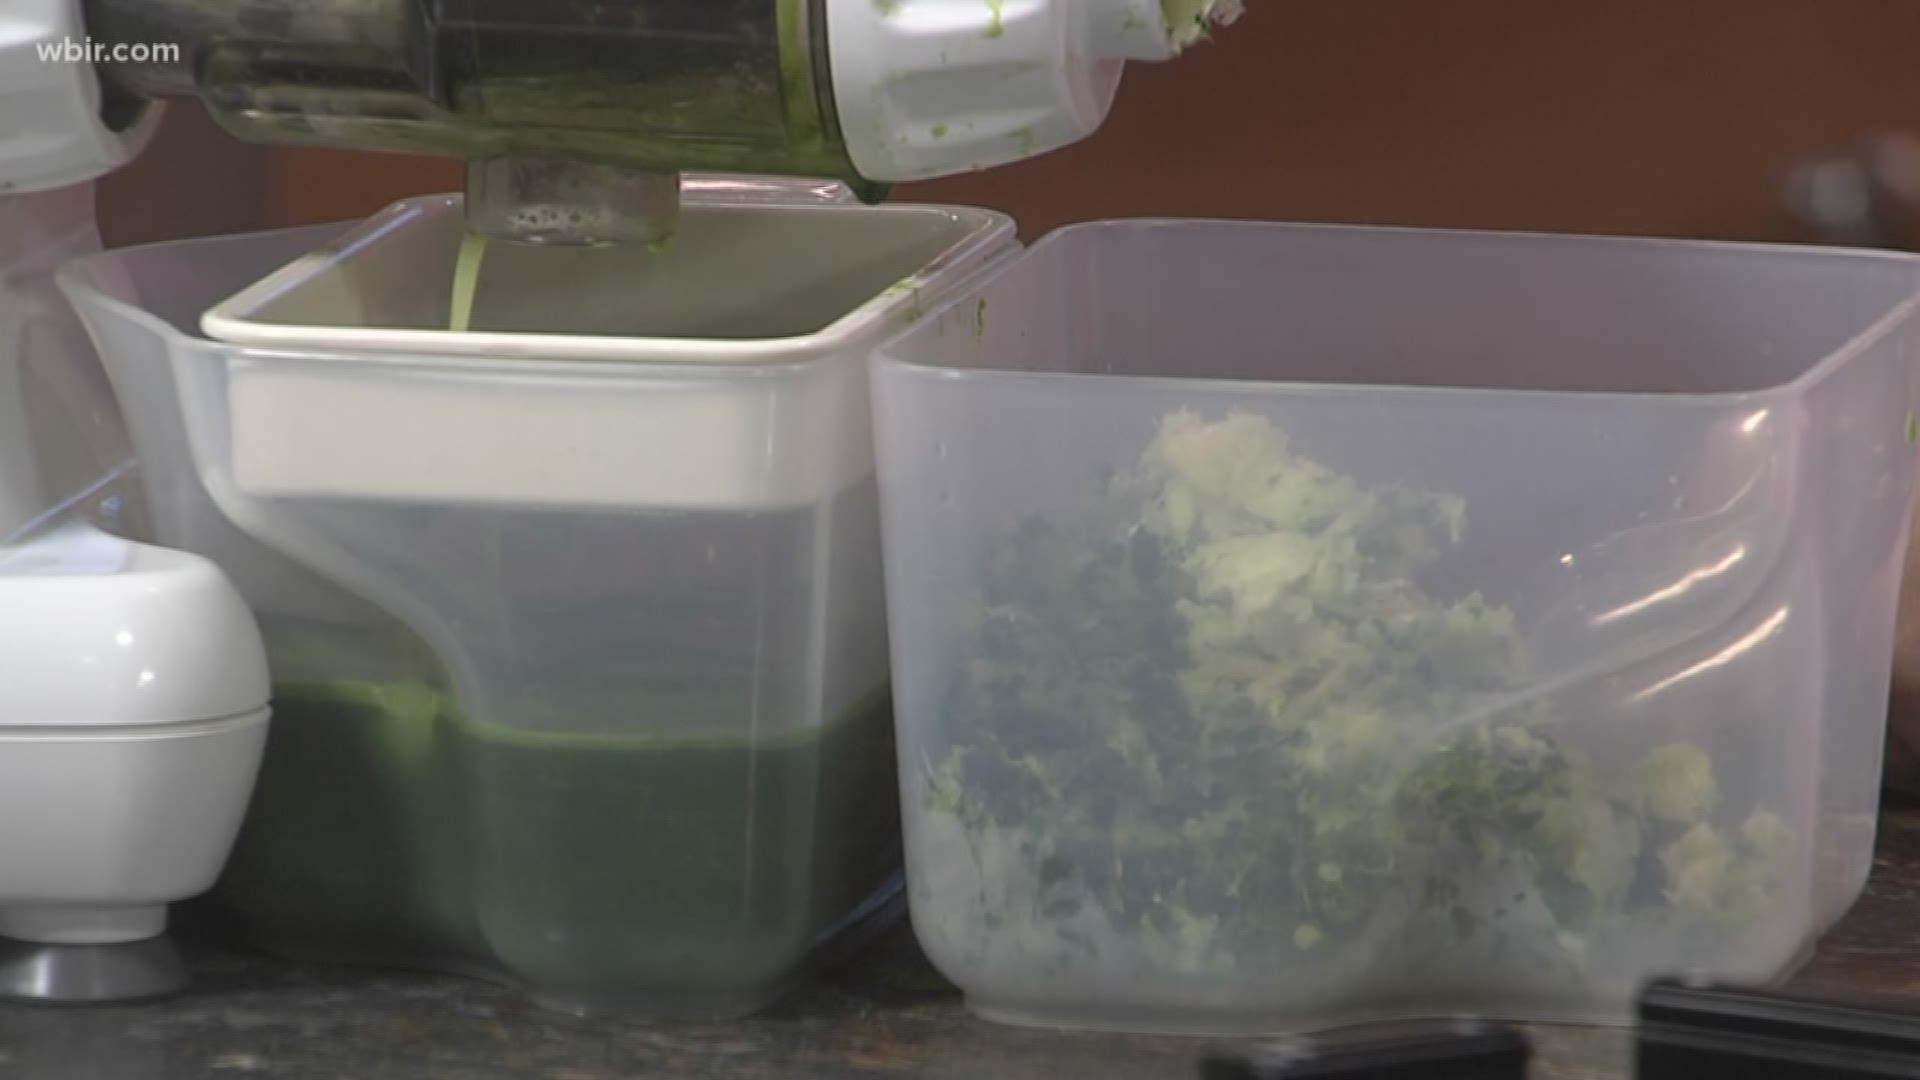 Health coach Camille Watson shows us healthy options for delicious juices.